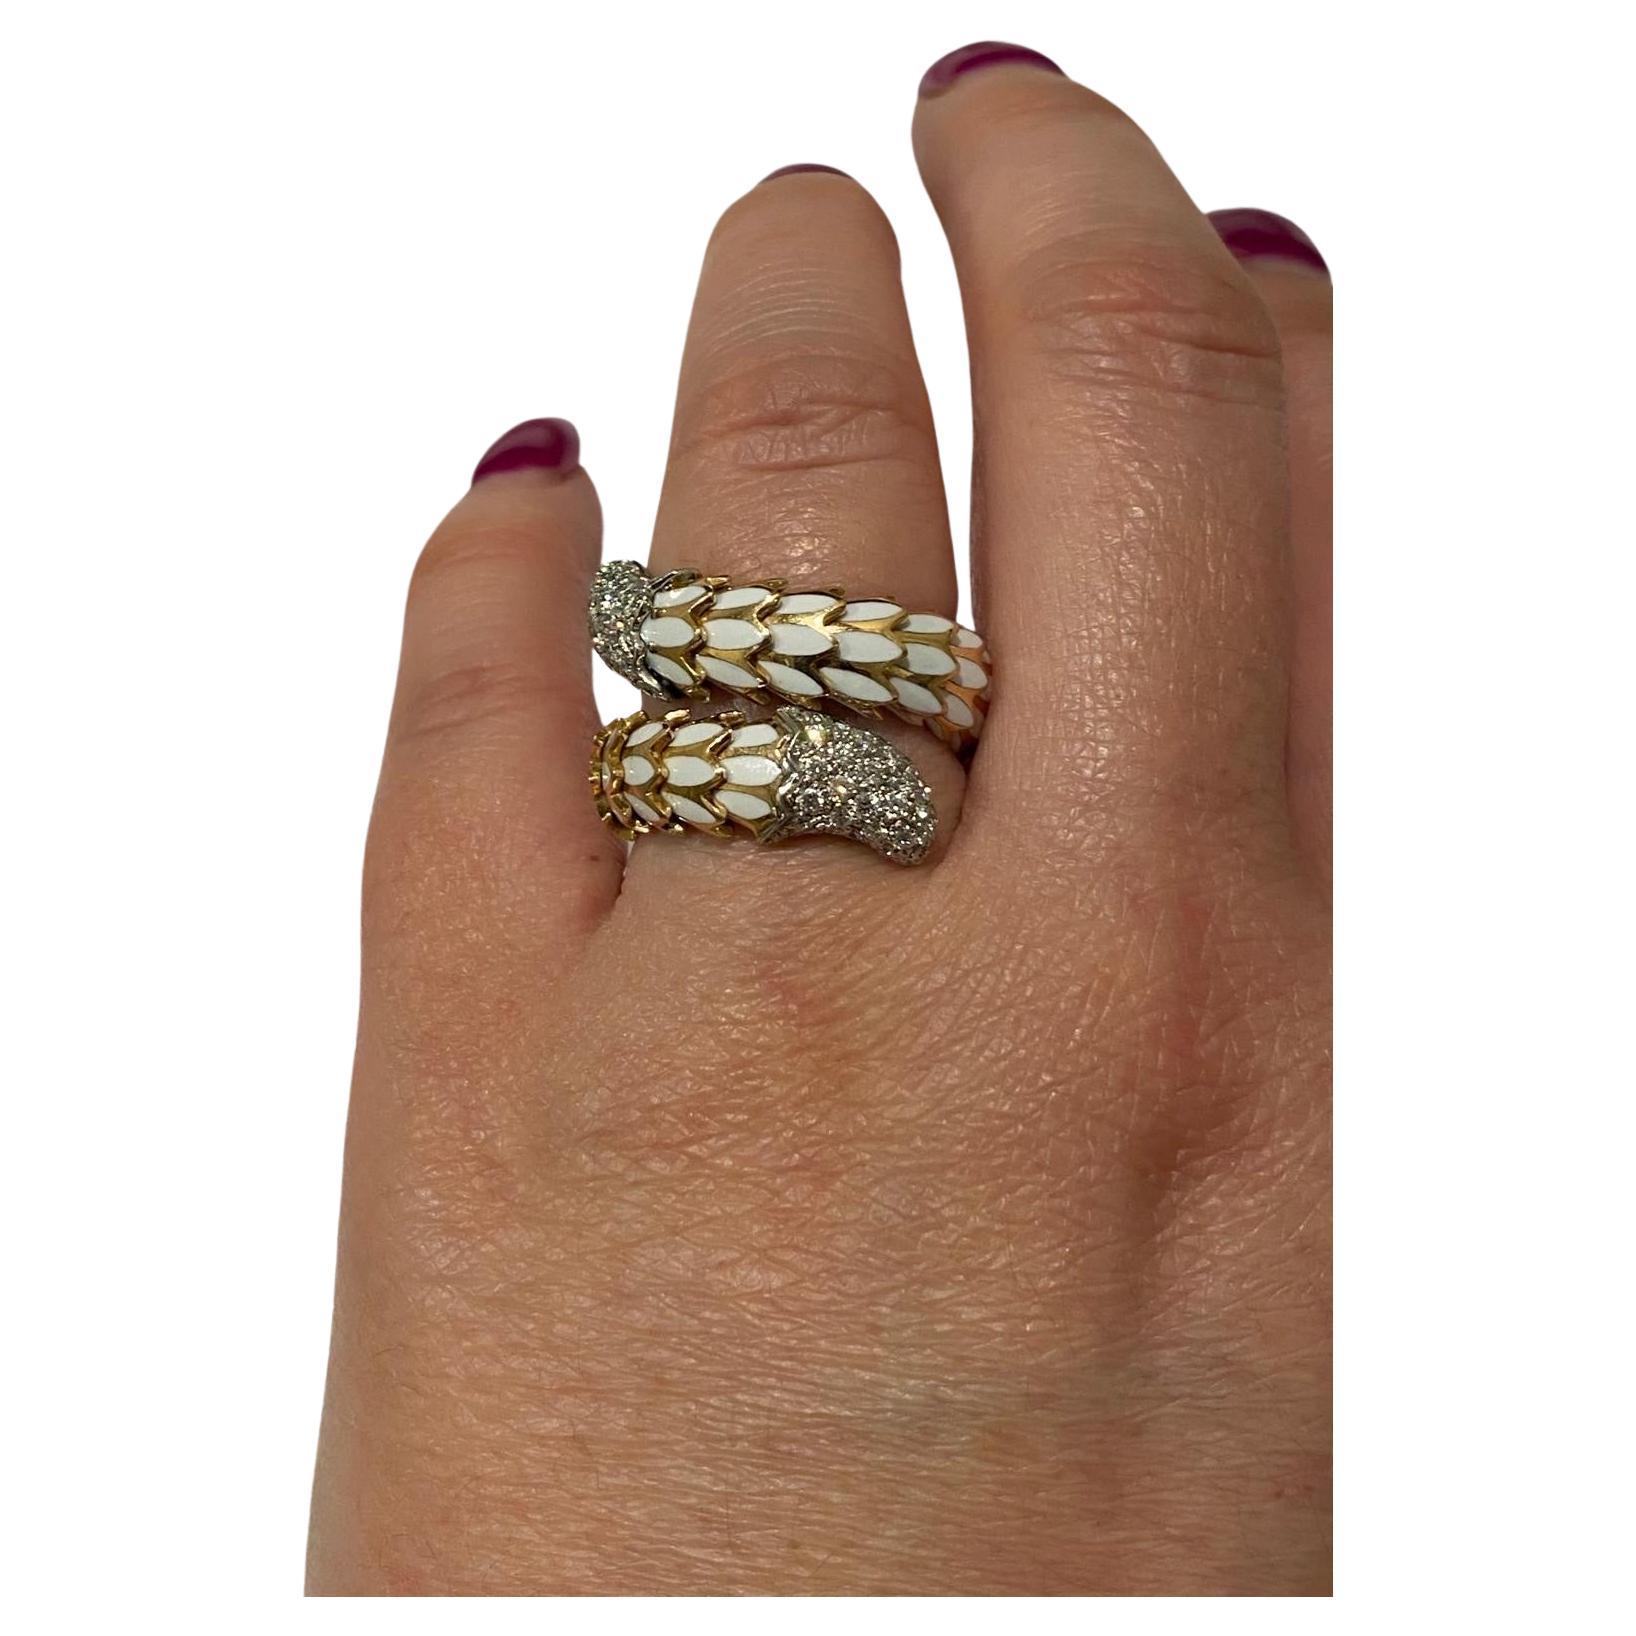 Striking Designer Robert Coin Diamond and White Enamel Snake Serpent Scale Ring. Hand crafted in 2-tone 18 Karat Rose and Whiter Gold with Diamond encrusted Head and Diamond. This piece has a wonderful, old-world charm. Head and Tail set with